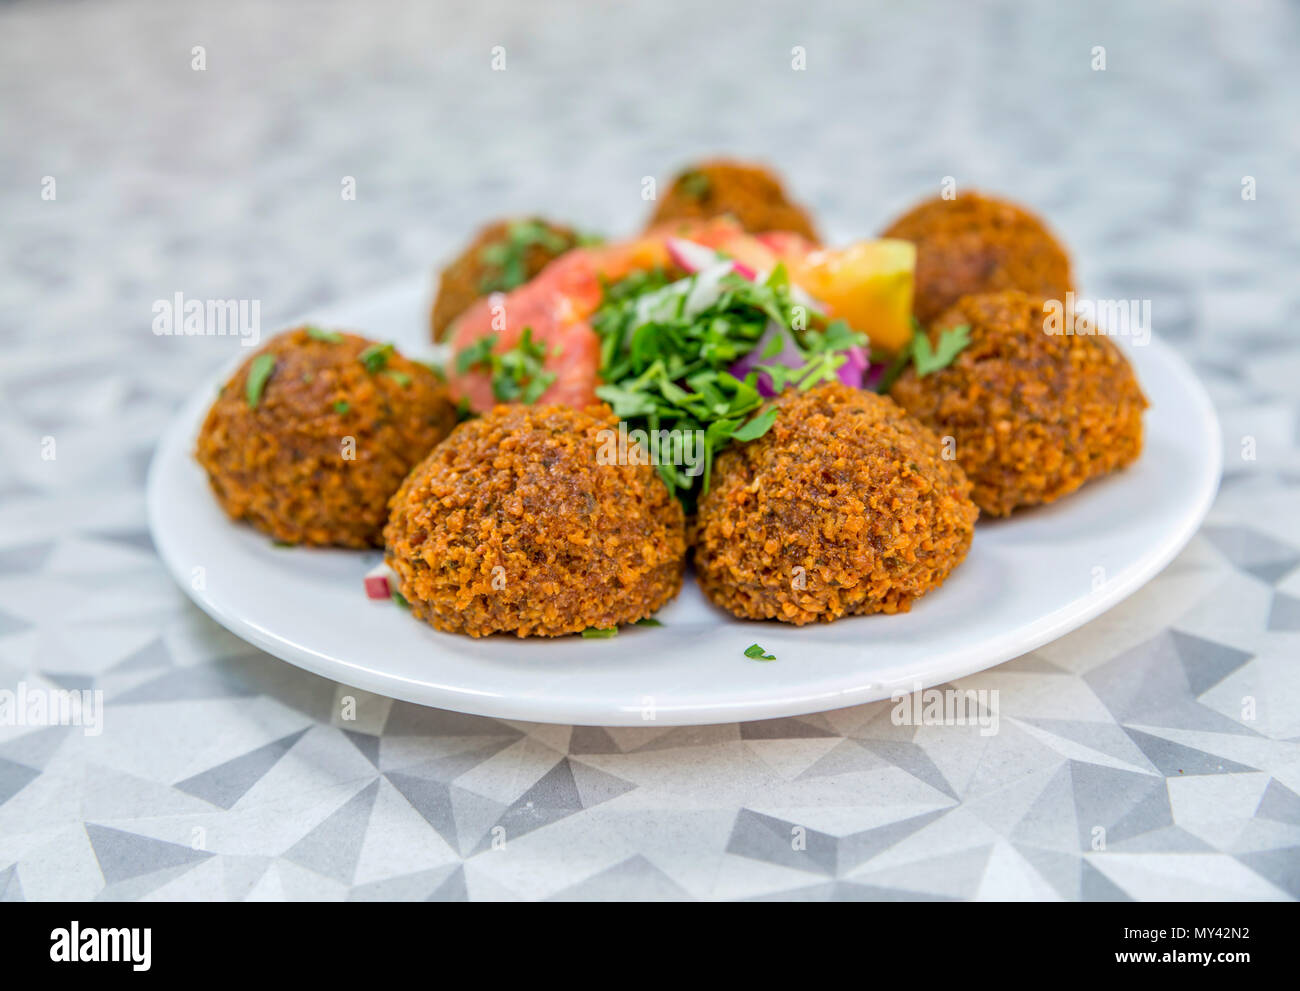 Falafel balls on a plate Stock Photo